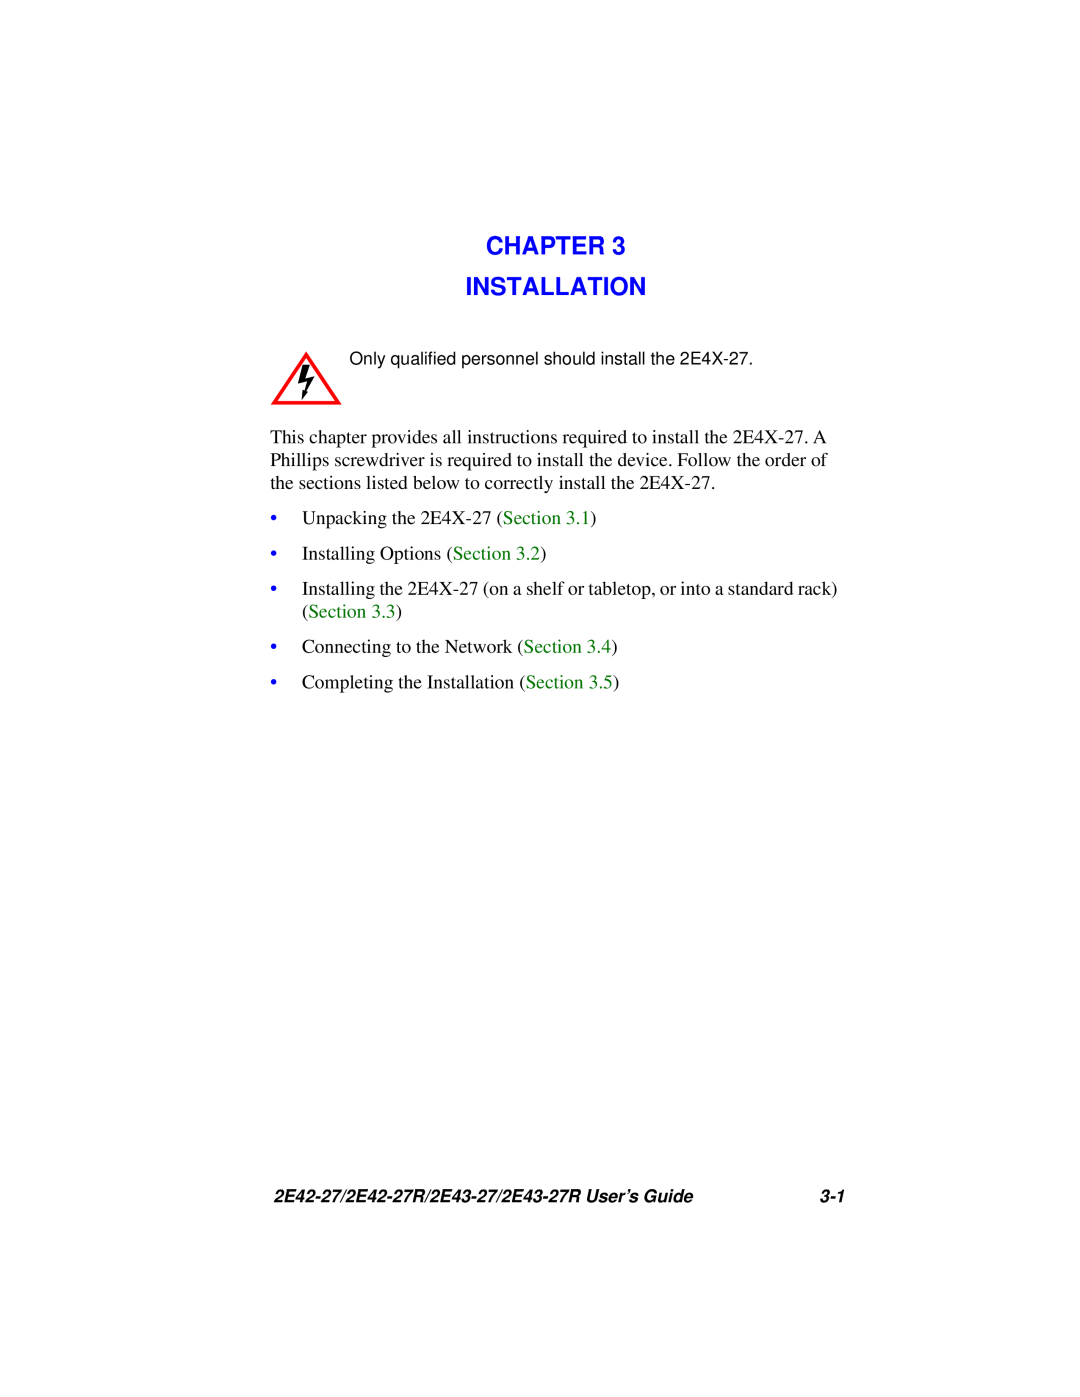 Cabletron Systems 2E42-27R, 2E43-27R manual Chapter Installation 